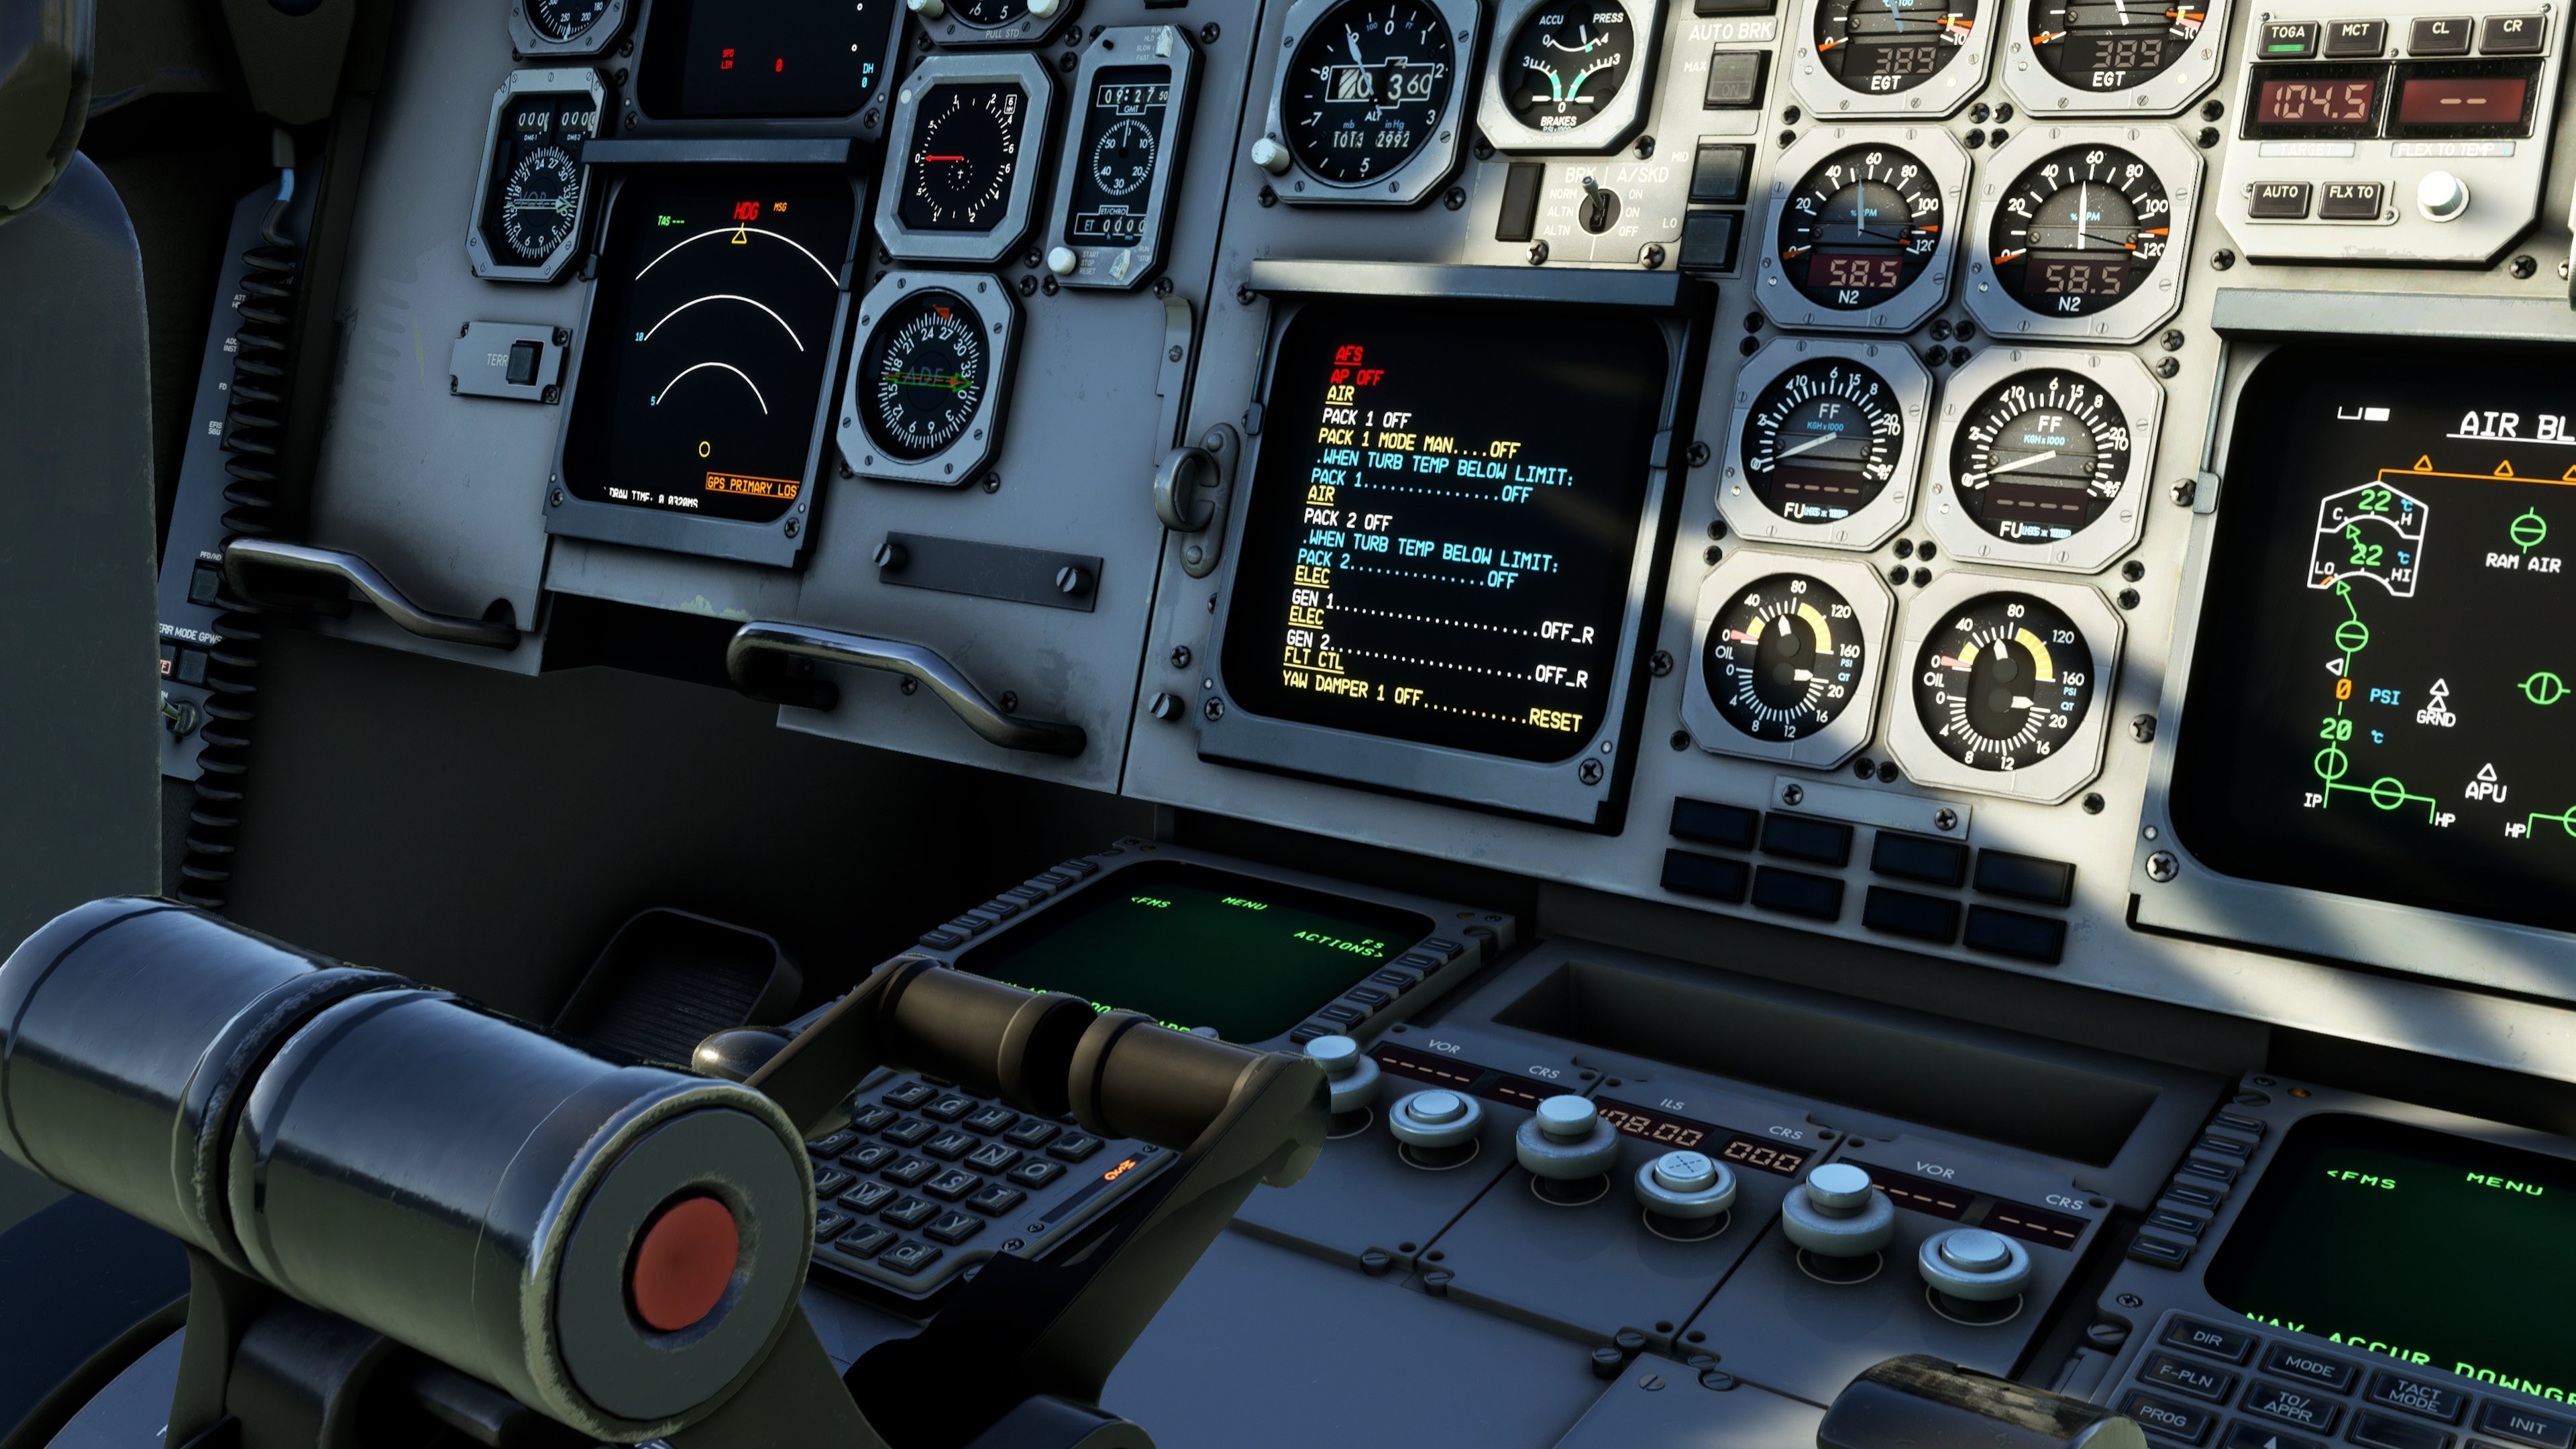 Flight Simulator celebrates its 40th anniversary with a colossal